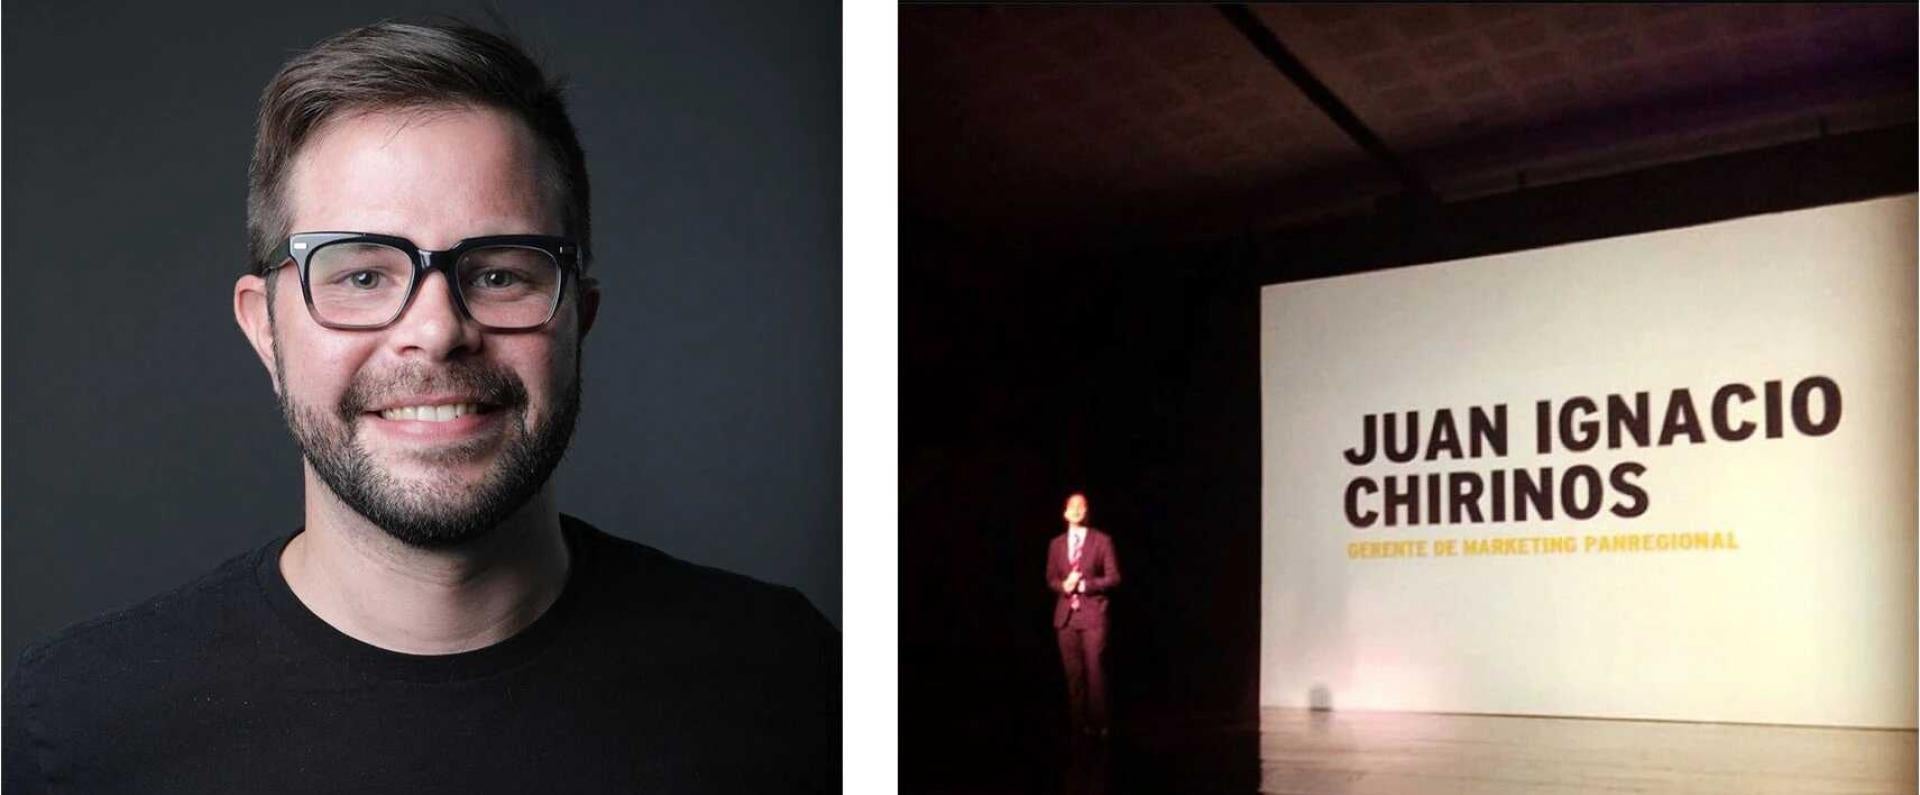 Juan's portrait on the left image side and his speaking on a stage on the right side